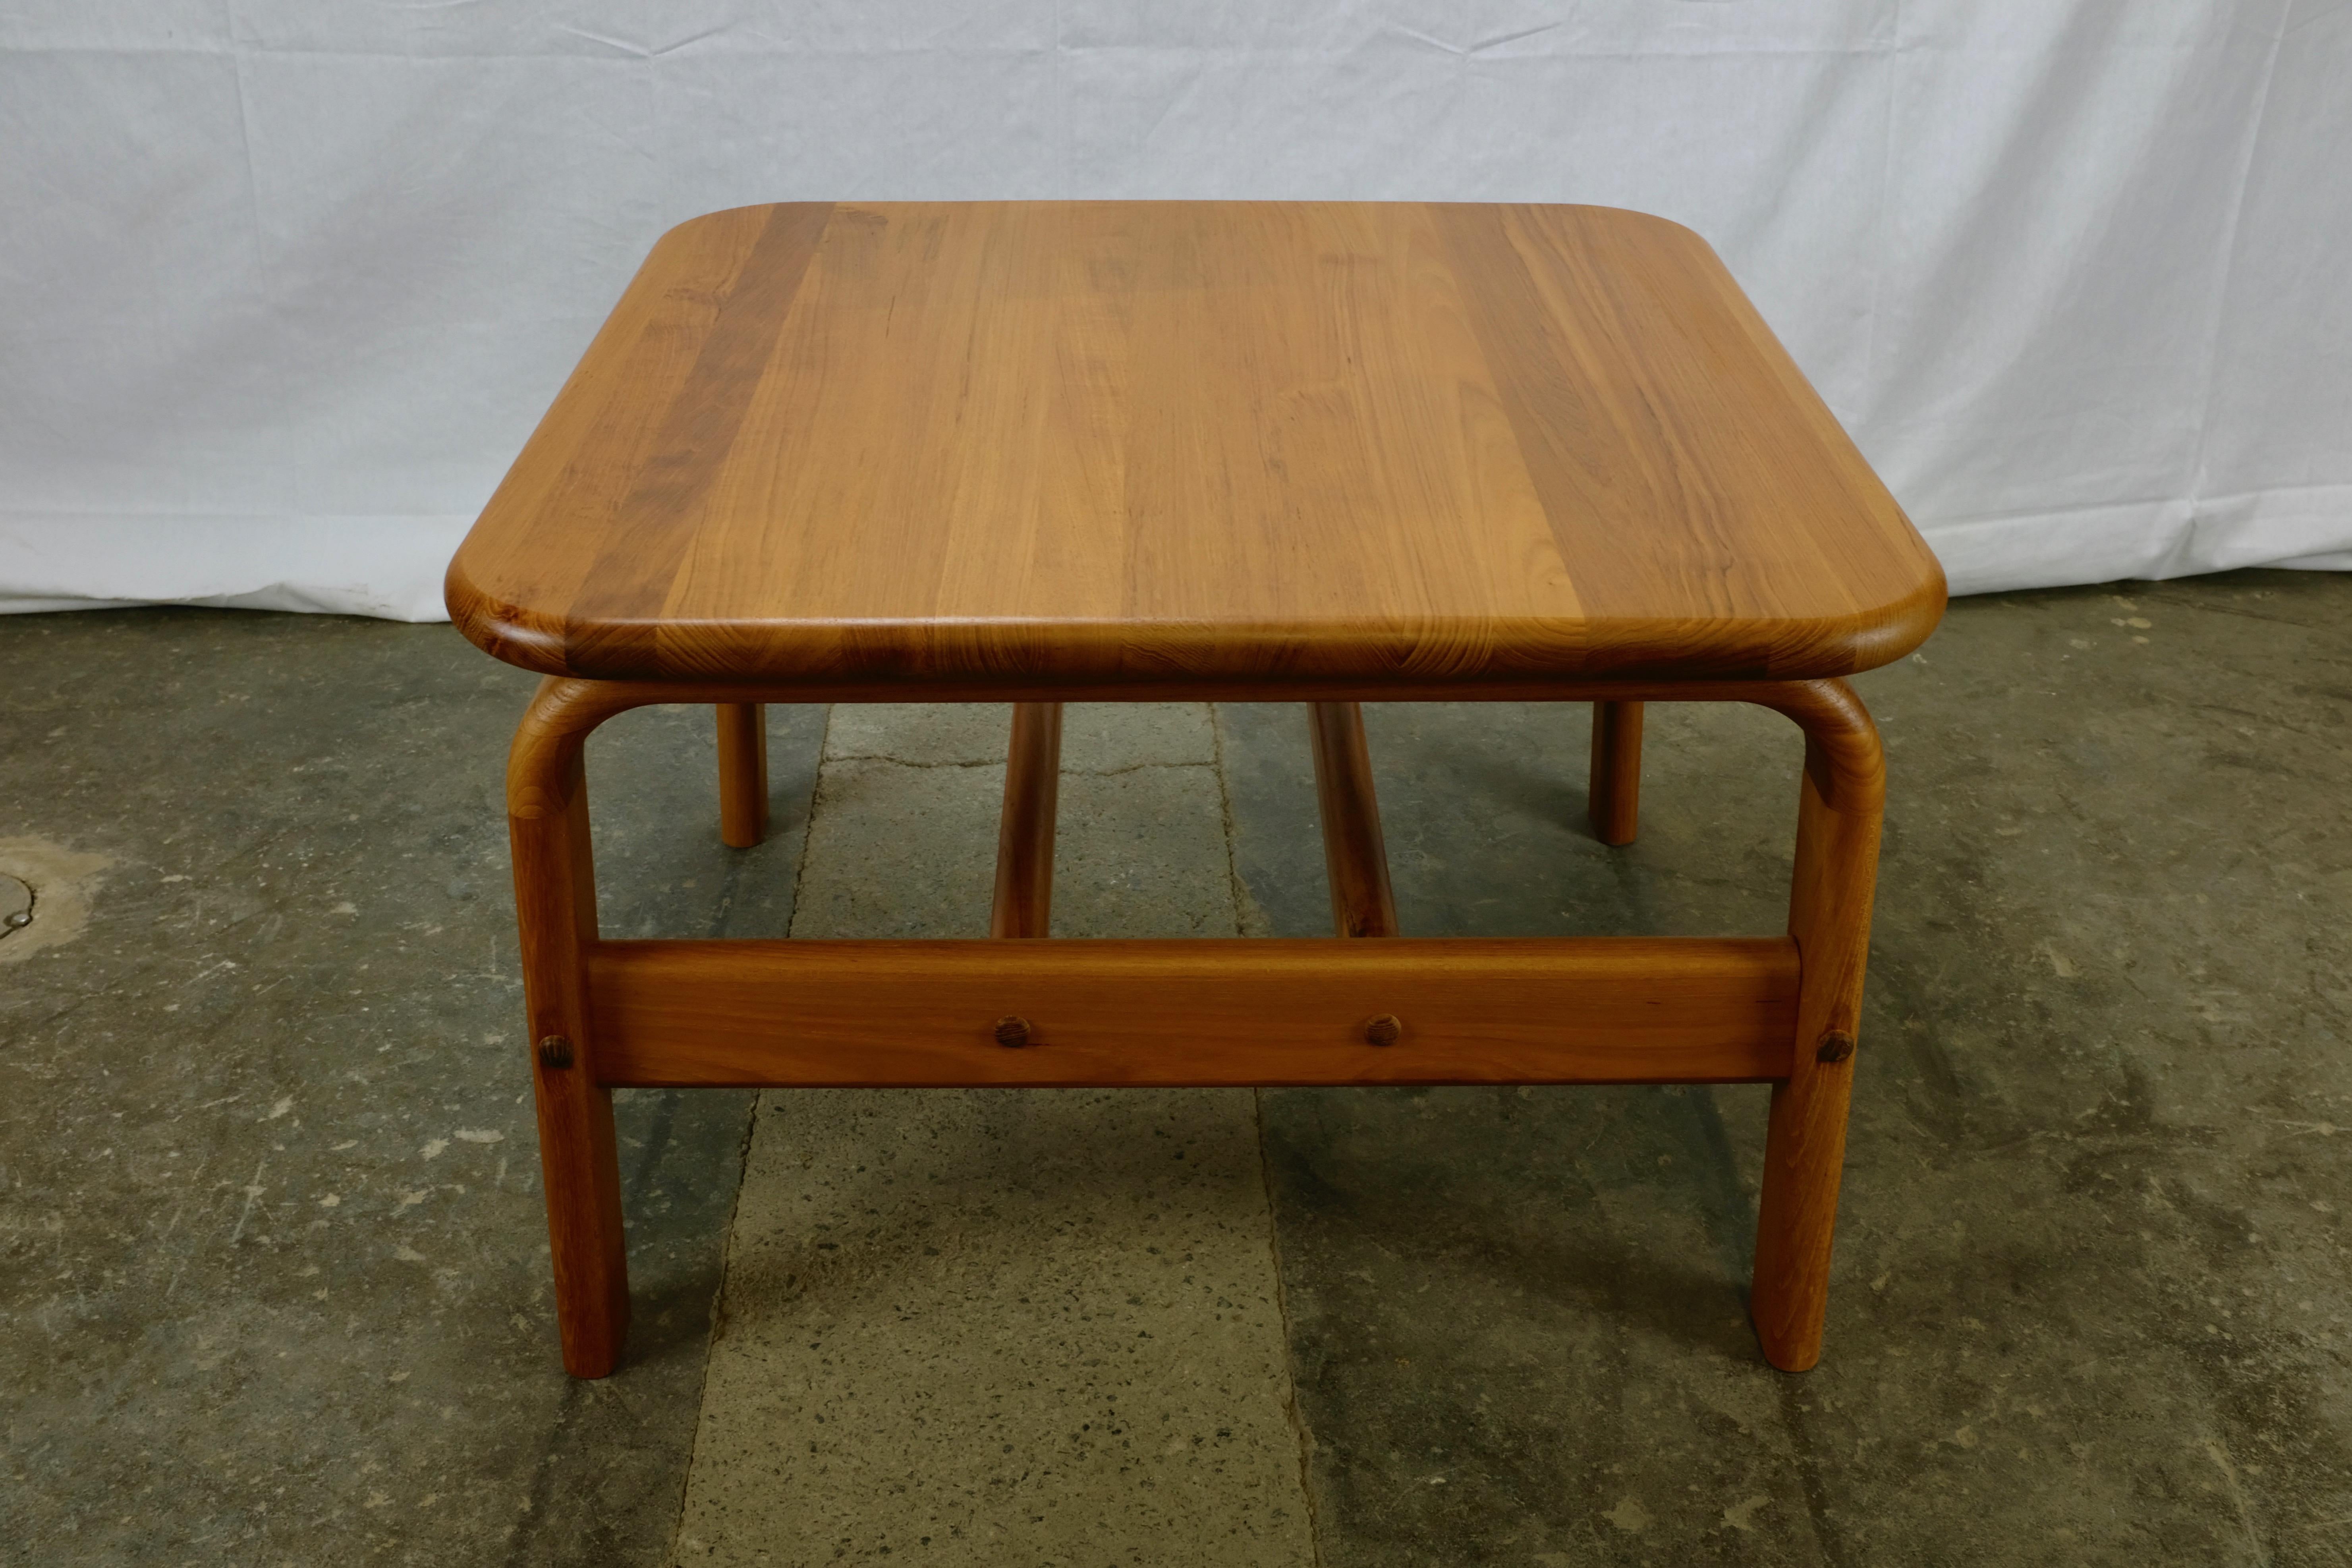 Danish-made coffee table featuring a solid teak top and sturdy legs and frame. 

The frame is constructed so that the legs appear to arch upwards to support the top. A bullnose profile on all edges lends a hint of softness to the table and also